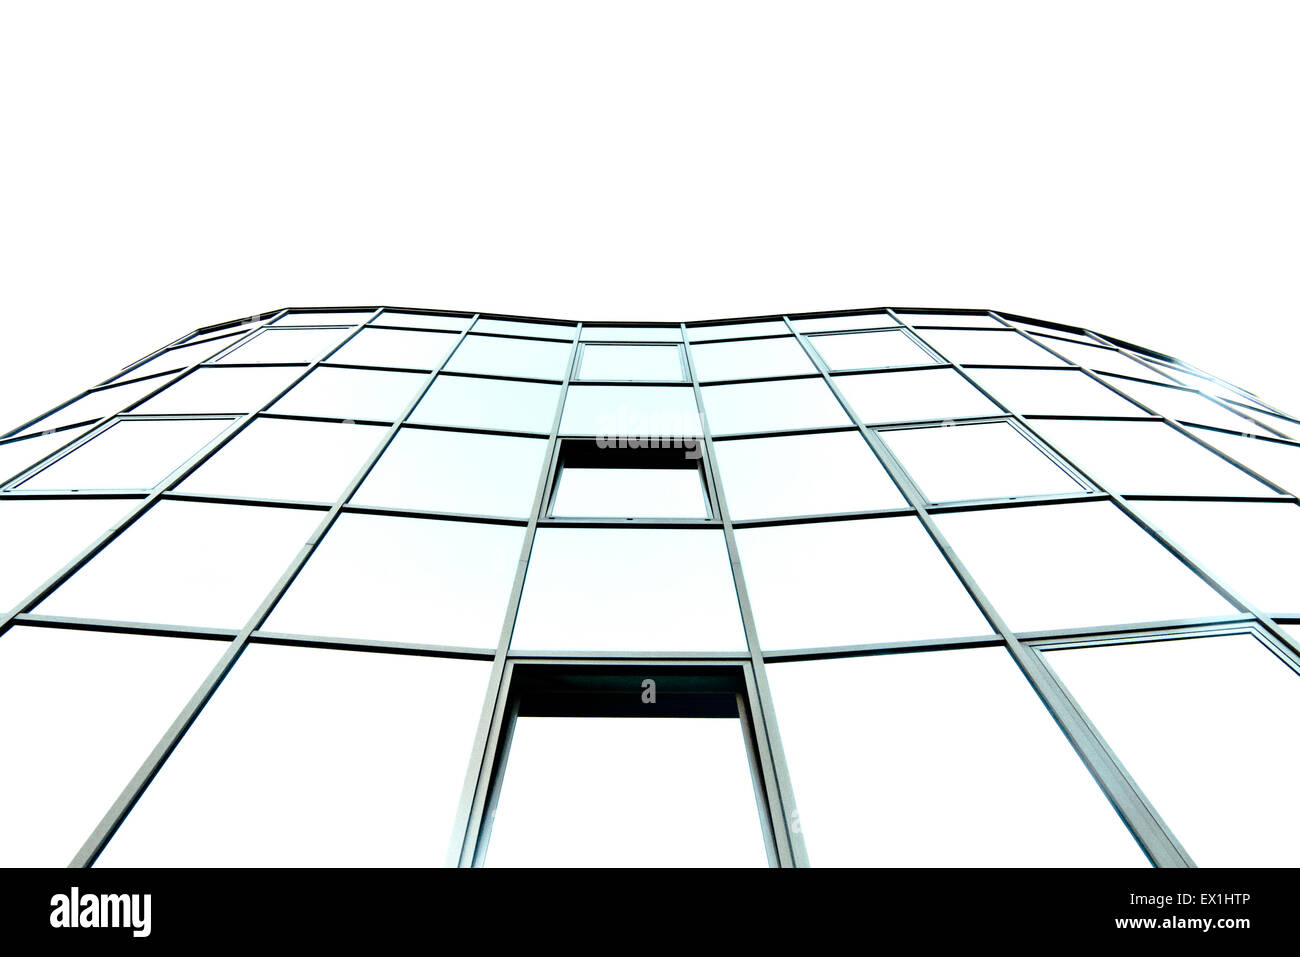 modern building windows pattern abstract Stock Photo